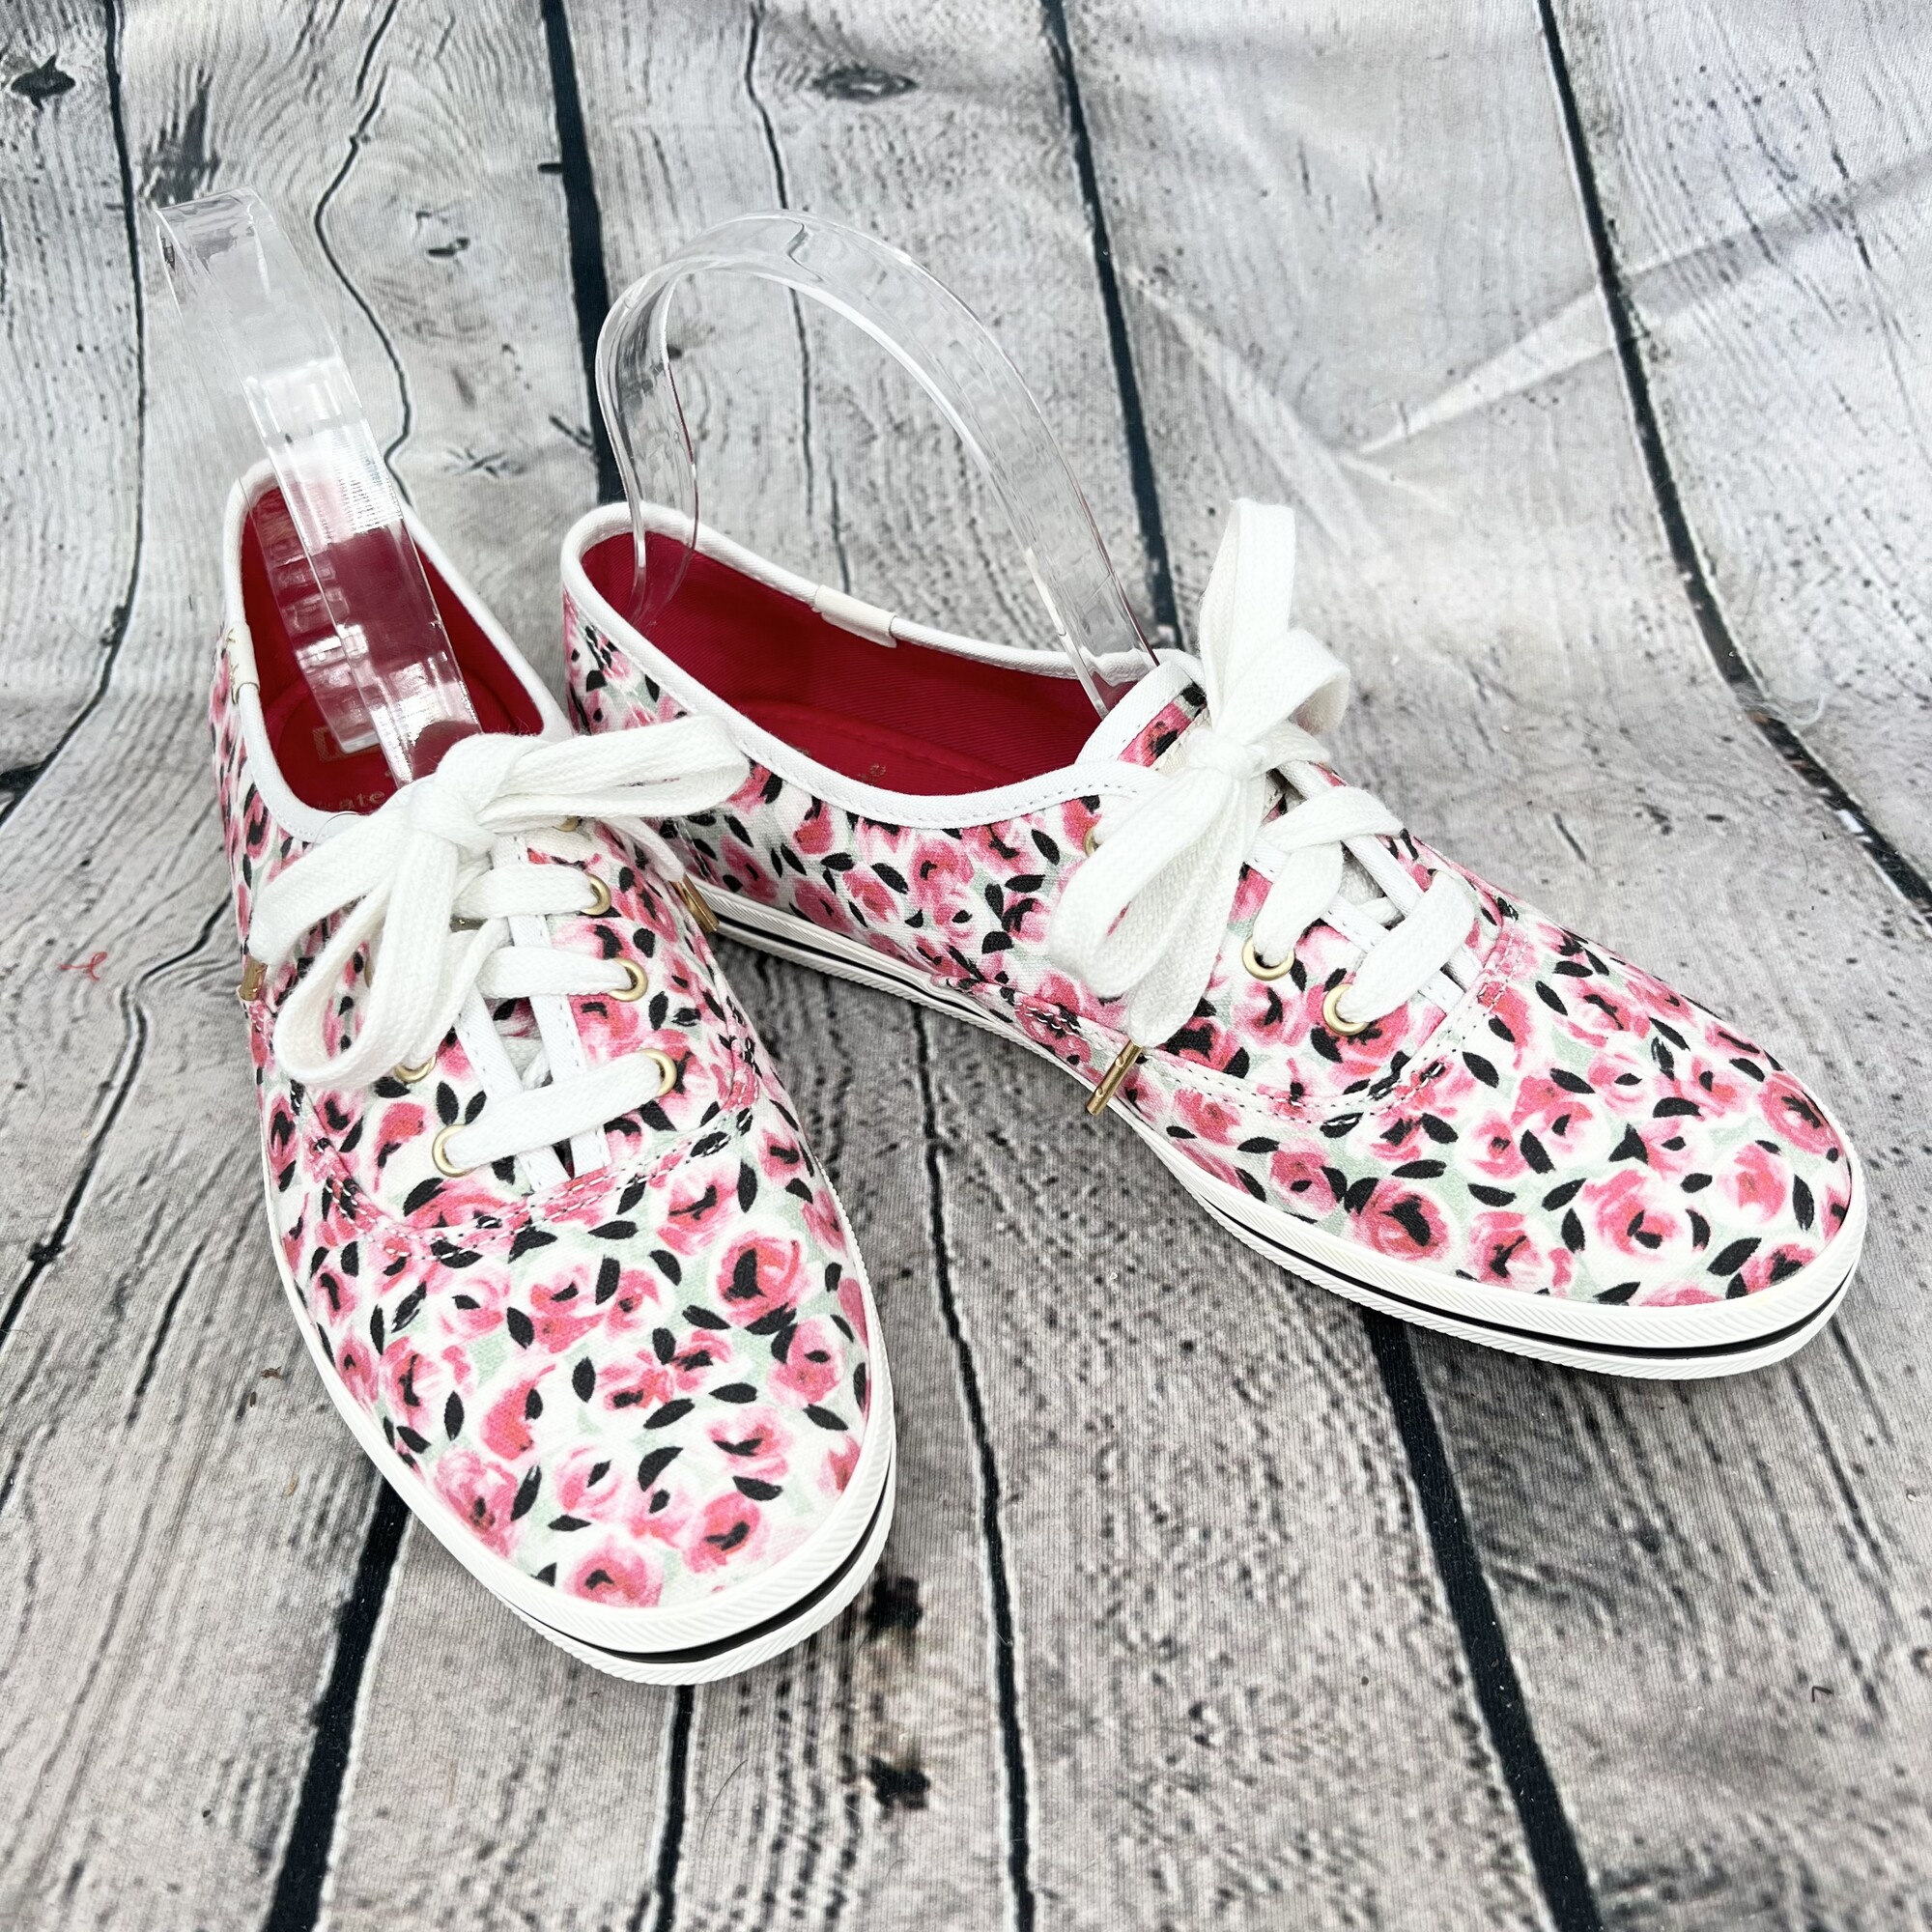 Kate Spade NY Keds | Once 'n Again in Fairbury, IL